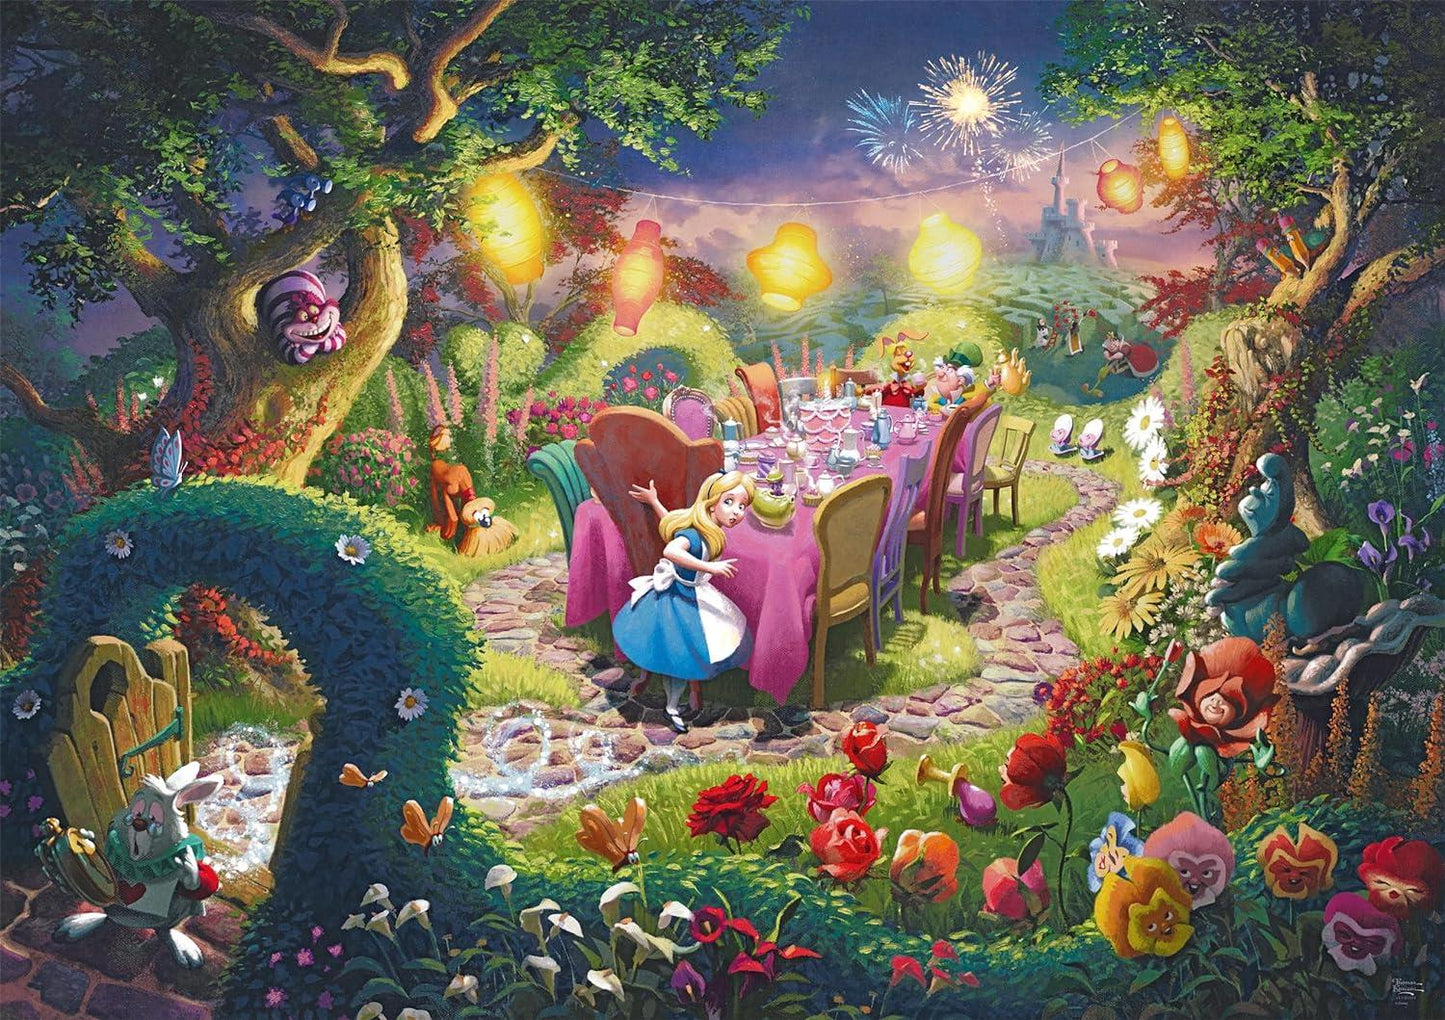 Schmidt - Thomas Kinkade - Mad Hatters Tea Party - 6000 Piece Jigsaw Puzzle